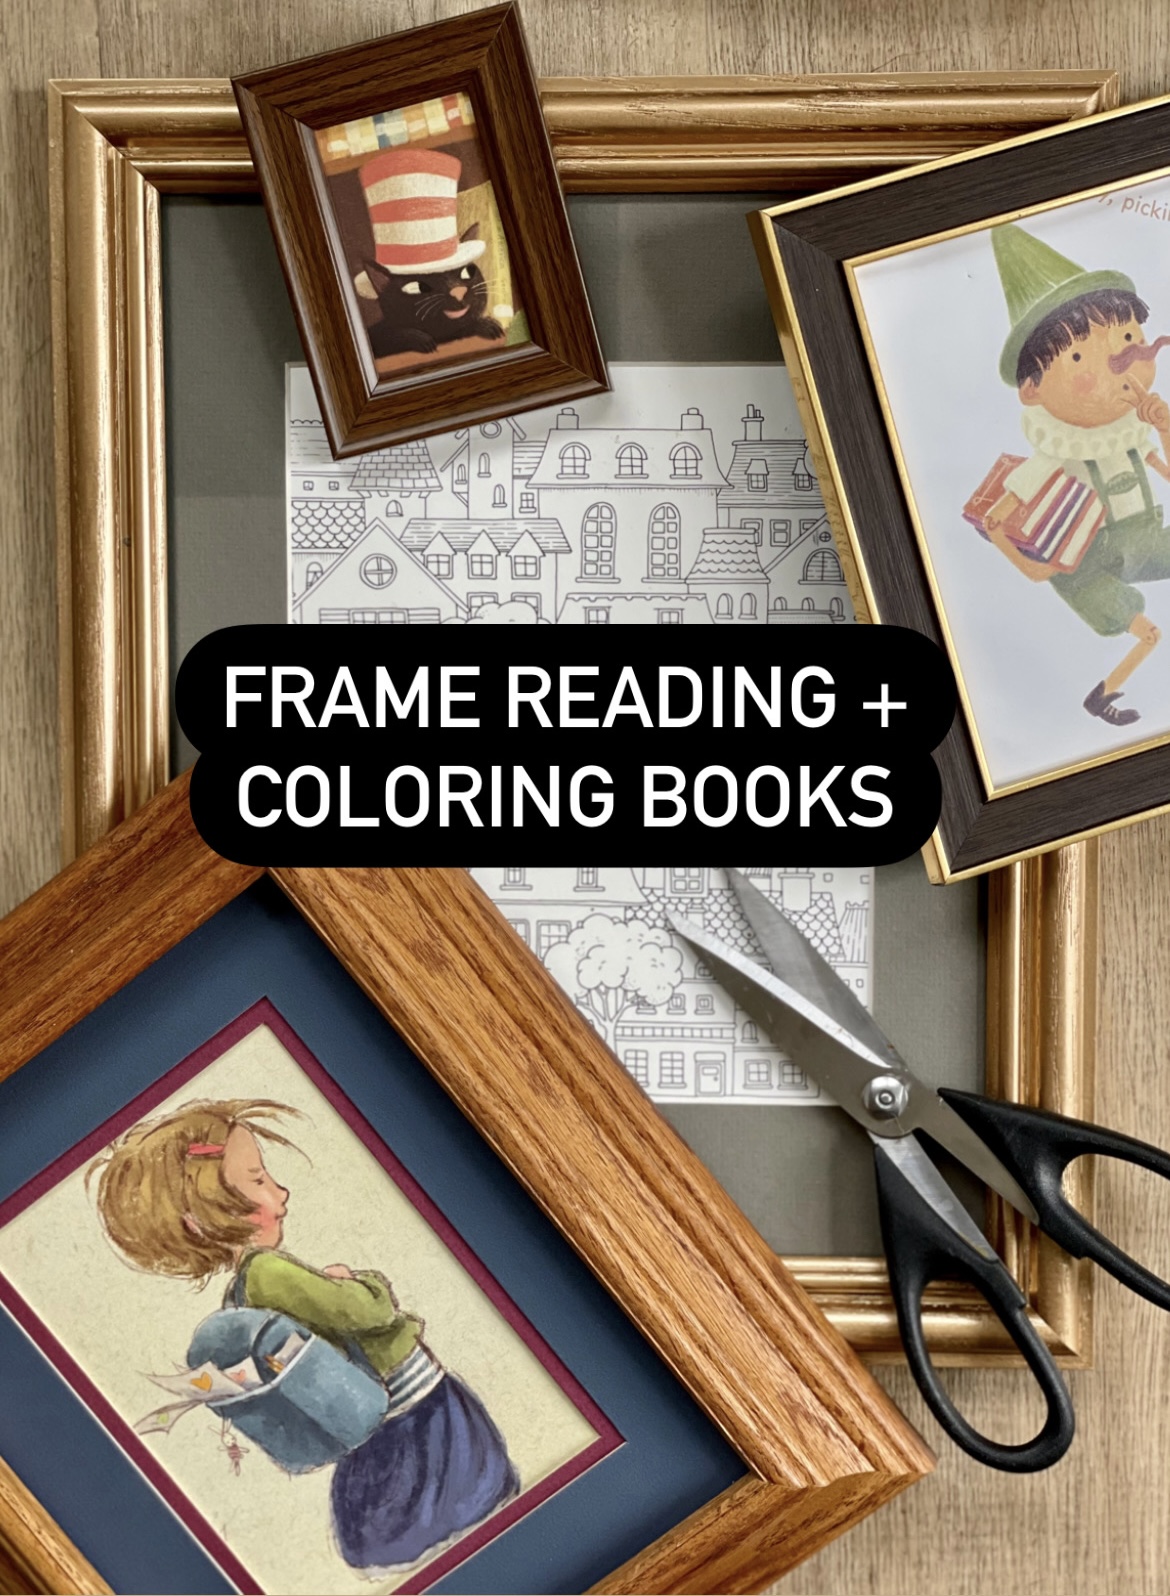 Framing coloring books, framing books, framing kids books, upcycling thrifted frames, ideas for framing, what to frame besides art, kids room art, kids room art ideas, kids room wall art, creative things to frame, diy decor for kids, framing books, using books as art, kids room inspo, kids room decor, kids room wall decor, kids room diy